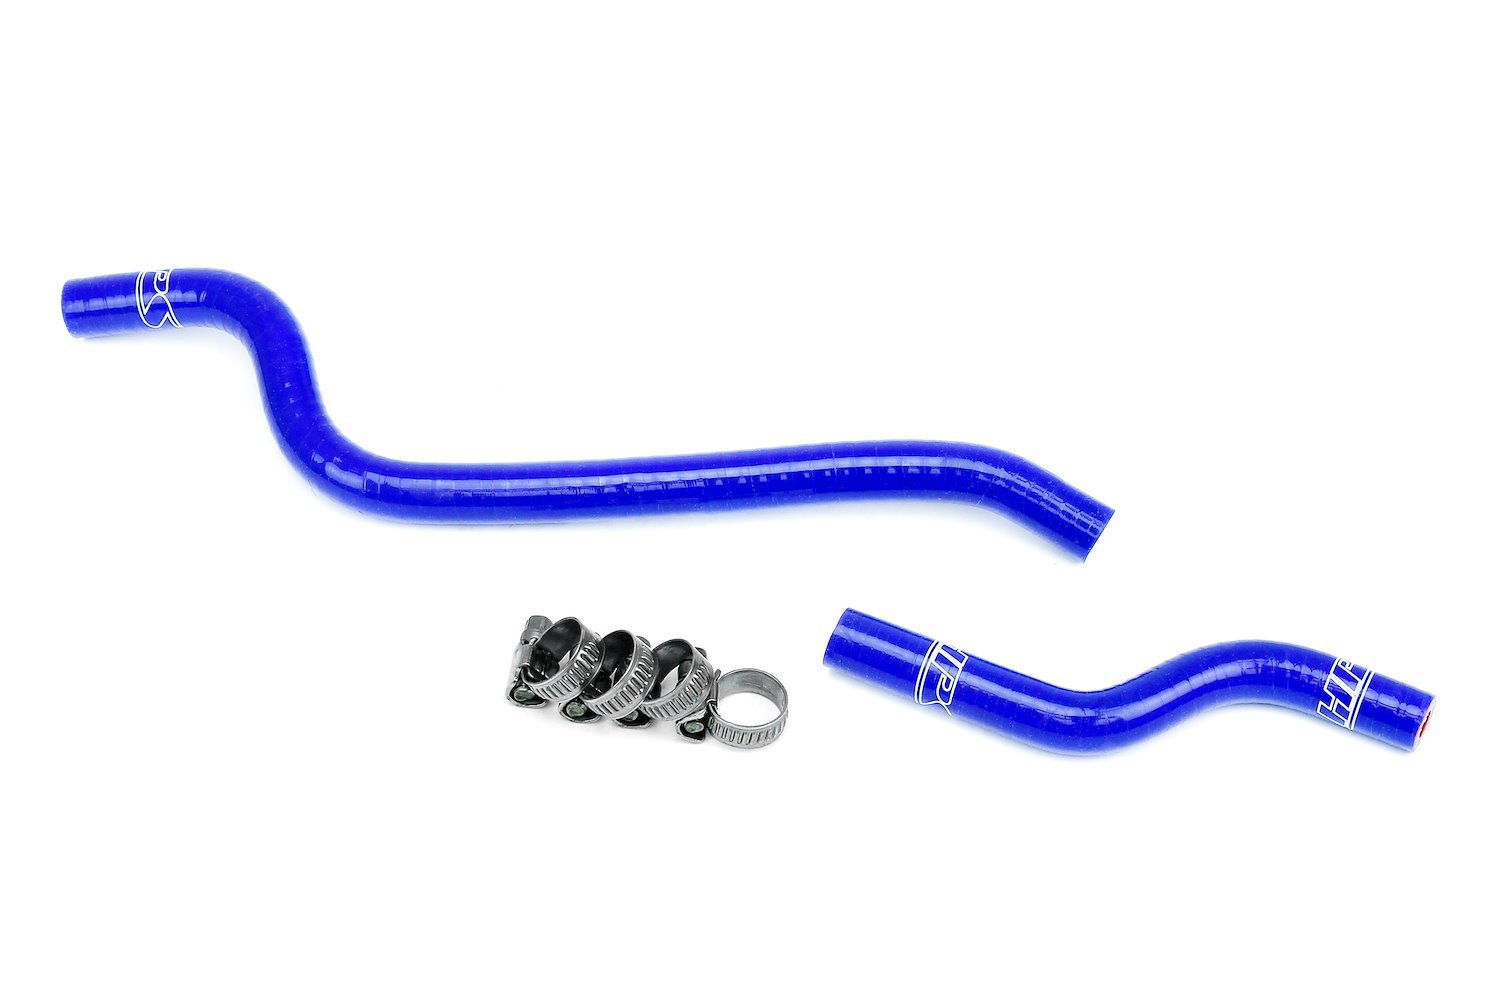 57-1873-BLUE Throttle Body Coolant Hose Kit, 3-Ply Reinforced Silicone, Replaces Rubber Throttle Body Coolant Hoses